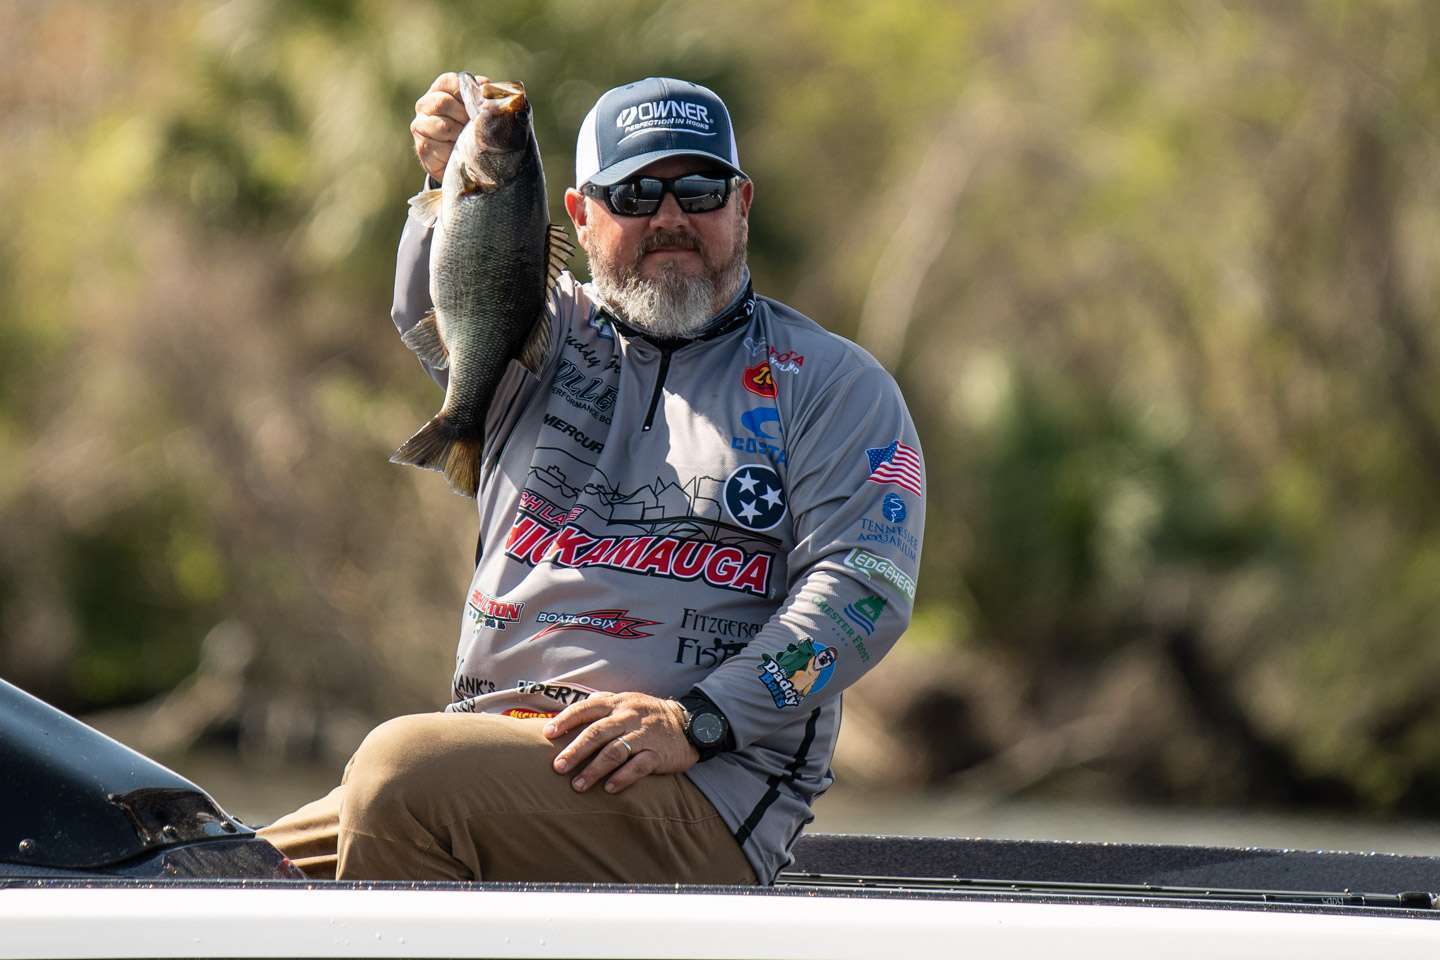 

<h4>Buddy Gross (25-1)</h4>
<p><b>Chickamauga, Georgia </b><br />
Gross is making his second Classic appearance — and hopefully he’ll get to attack this one with both feet. Gross severely injured his ankle in a horseback riding accident before last year’s Classic on Ray Roberts and hobbled, literally, to a 52nd-place finish. In some ways, this feels like his first Classic appearance. But the accomplished ledge and brushpile angler, who claimed his first Elite Series victory in 2020 on Lake Eufaula, is healthy now and could make noise at Hartwell.<br />
” class=”wp-image-567954″ width=”1440″ height=”960″/><figcaption>
<h4>Buddy Gross (25-1)</h4>
<p><b>Chickamauga, Georgia </b><br />
Gross is making his second Classic appearance — and hopefully he’ll get to attack this one with both feet. Gross severely injured his ankle in a horseback riding accident before last year’s Classic on Ray Roberts and hobbled, literally, to a 52nd-place finish. In some ways, this feels like his first Classic appearance. But the accomplished ledge and brushpile angler, who claimed his first Elite Series victory in 2020 on Lake Eufaula, is healthy now and could make noise at Hartwell.<br />
</figcaption></figure>
<figure class=